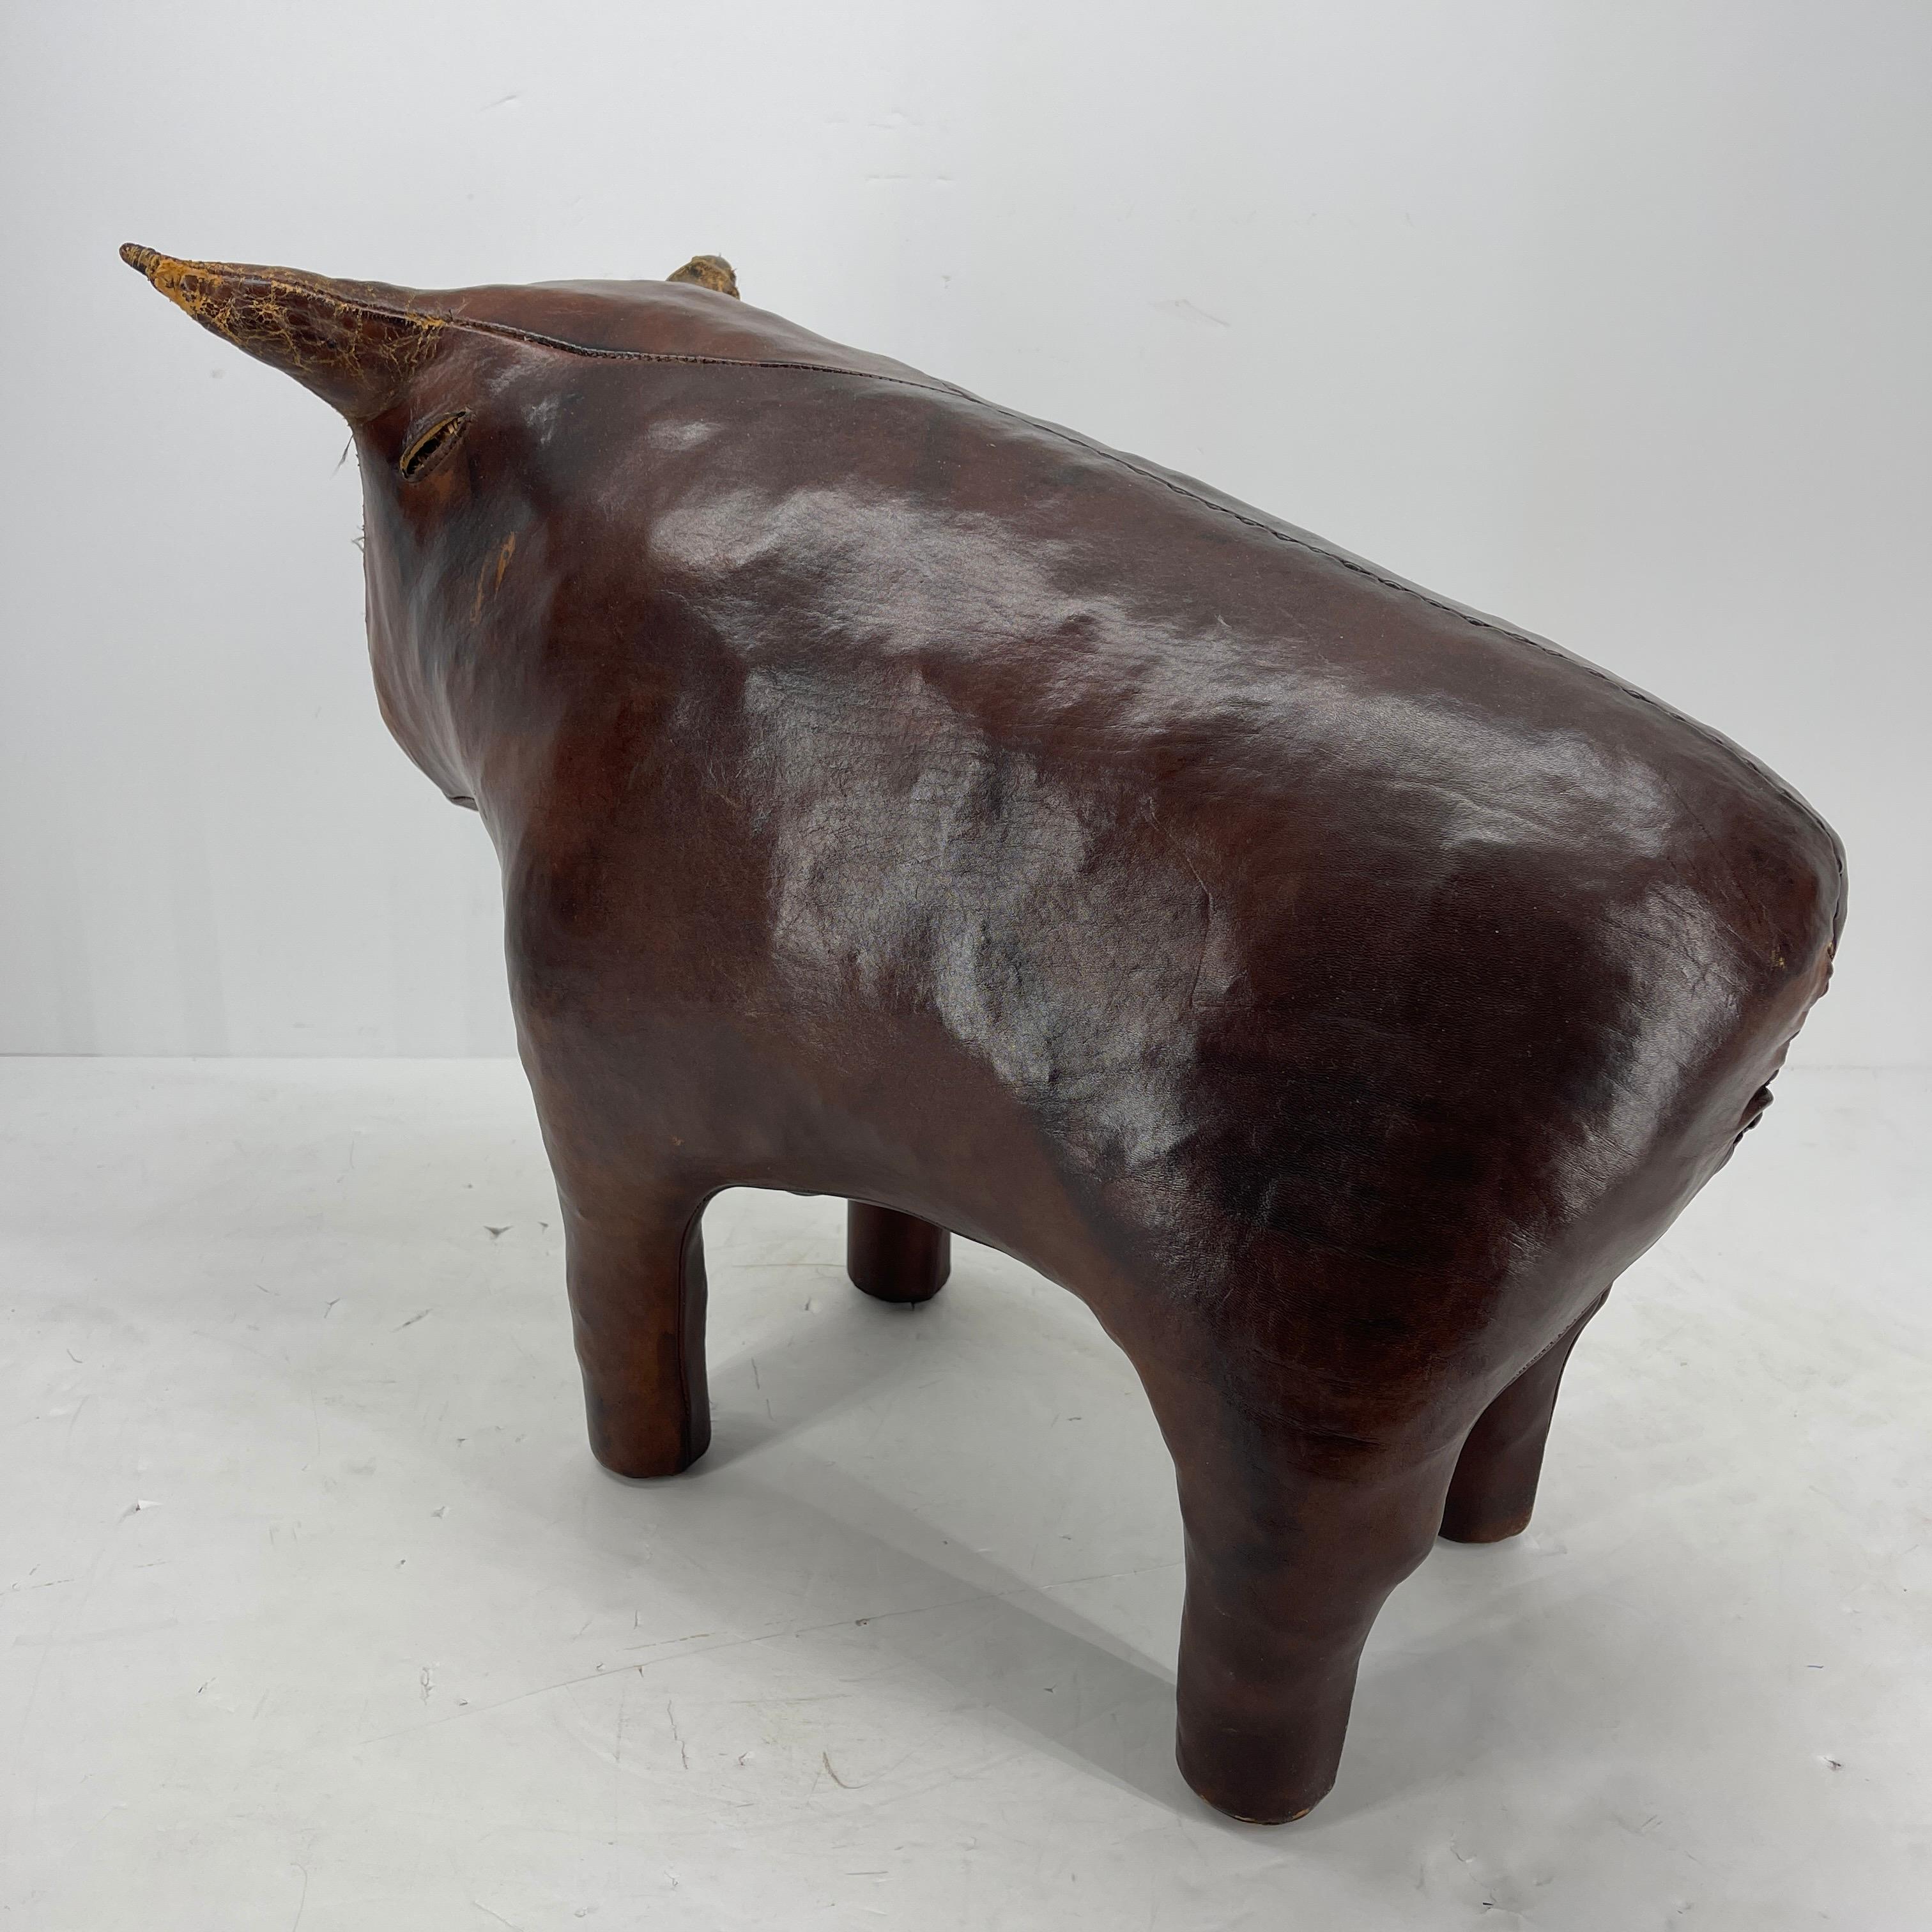 Abercrombie & Fitch Leather Bull Statue Footstool, Mid-Century Modern 1